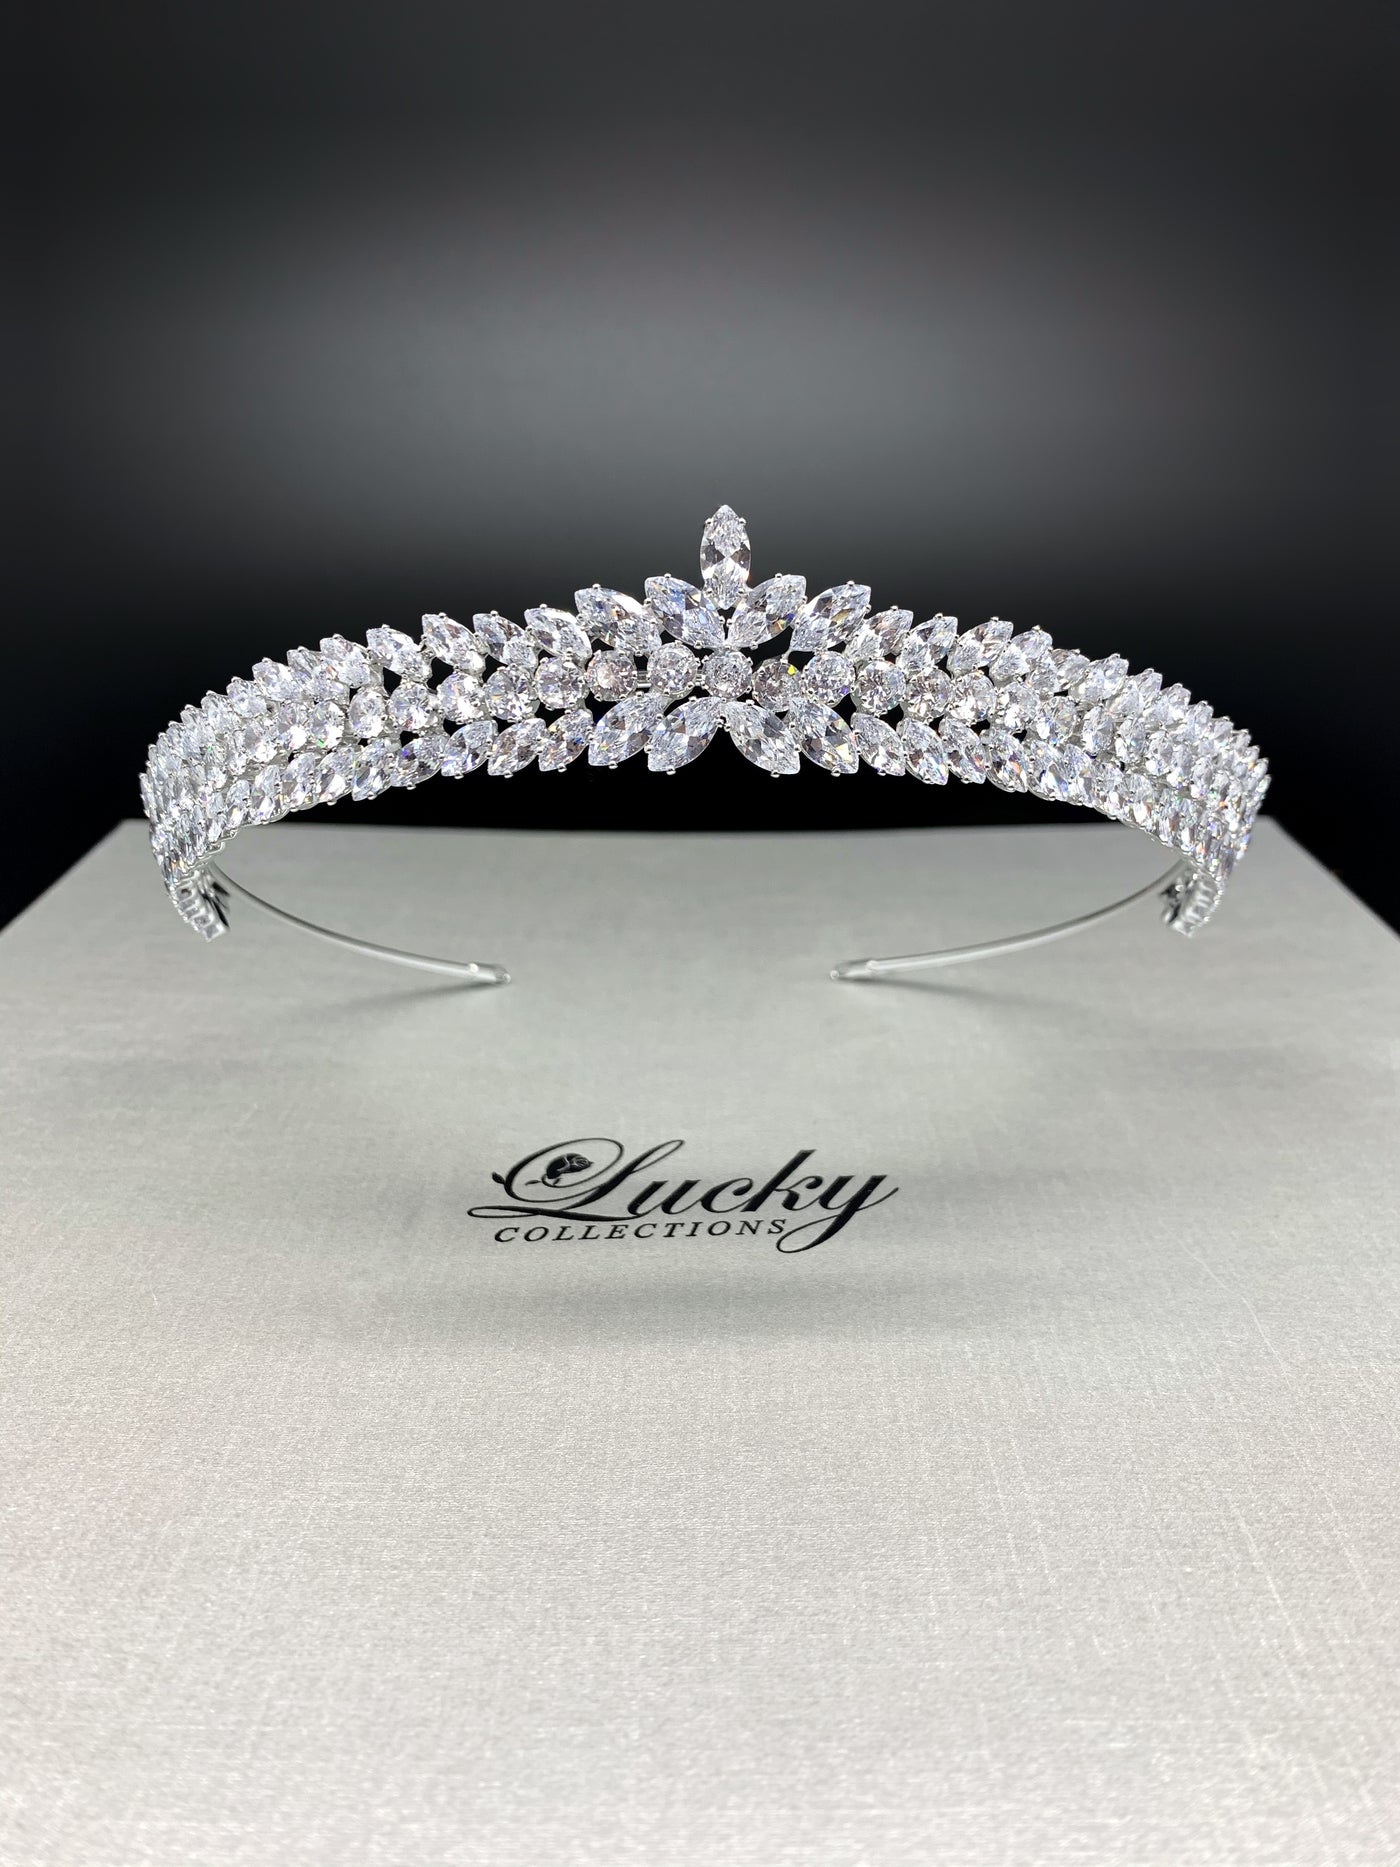 Short Zirconia Tiara, 1 Inch High, Dainty for All Occasions by Lucky Collections ™